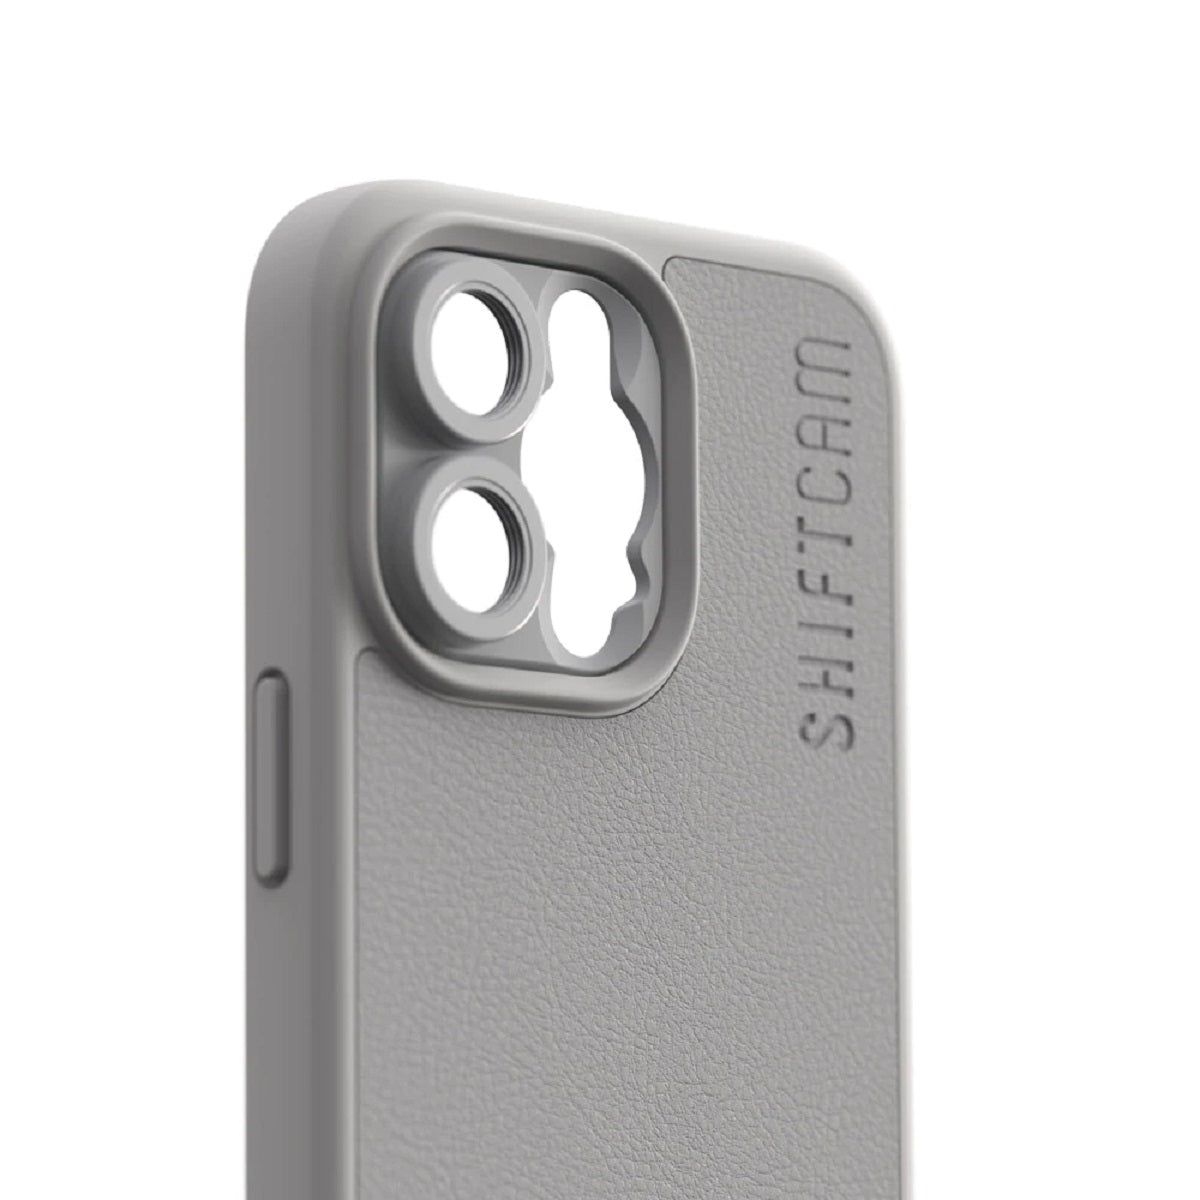 Shiftcam 60mm Telephoto Lens with iPhone 13 Case